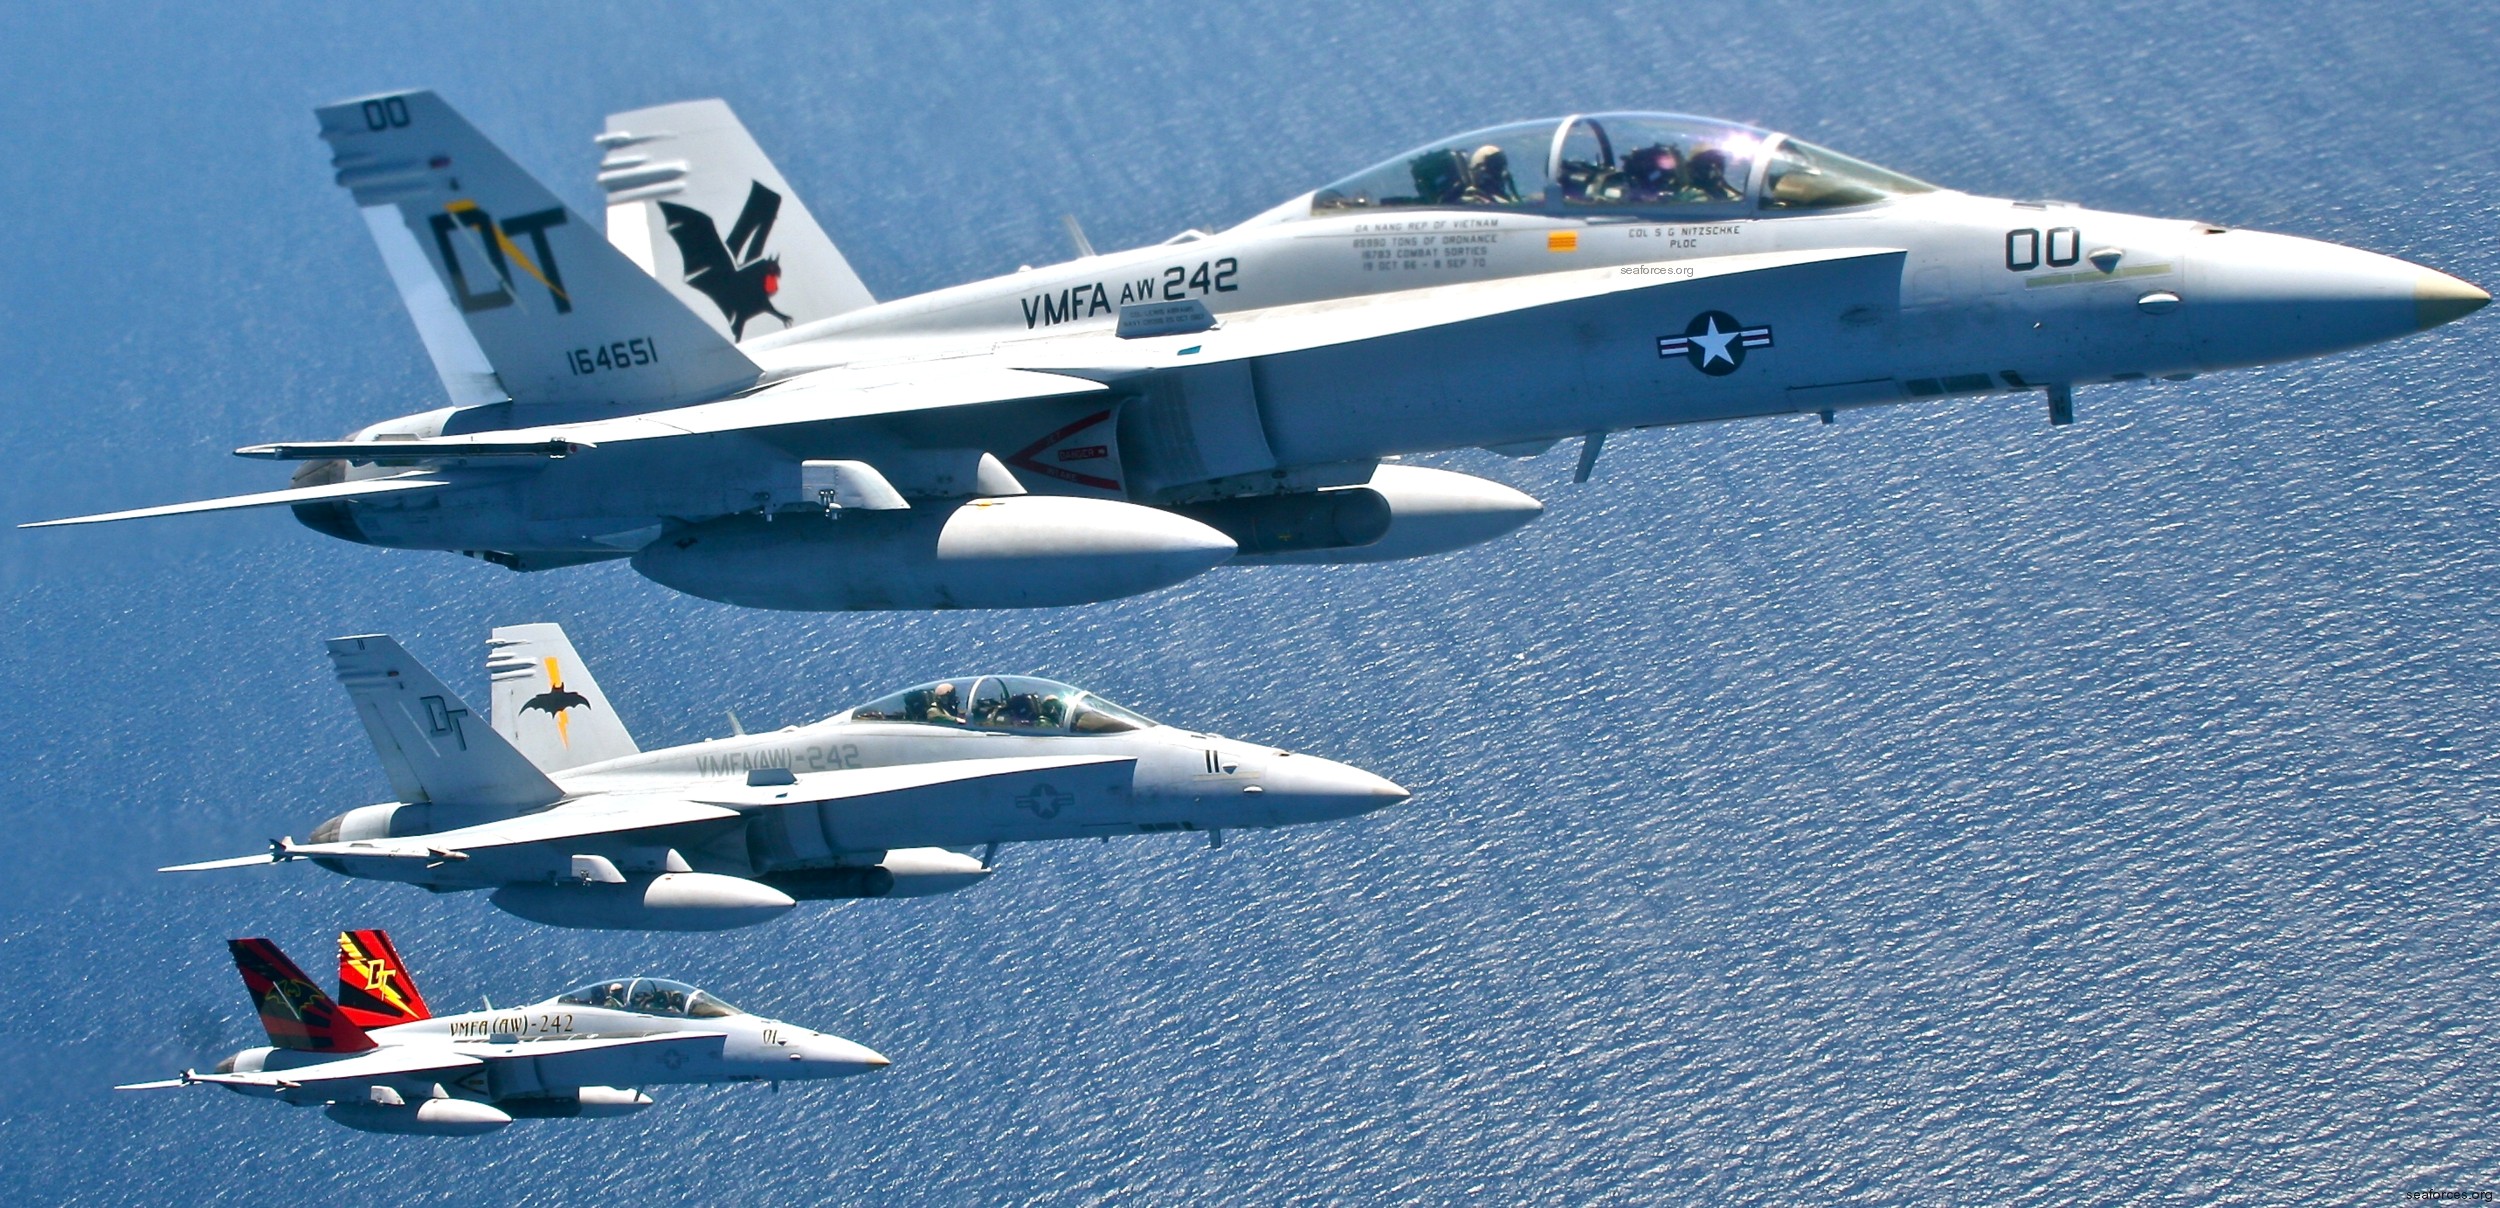 vmfa(aw)-242 bats marine all-weather fighter attack squadron usmc f/a-18d hornet 18